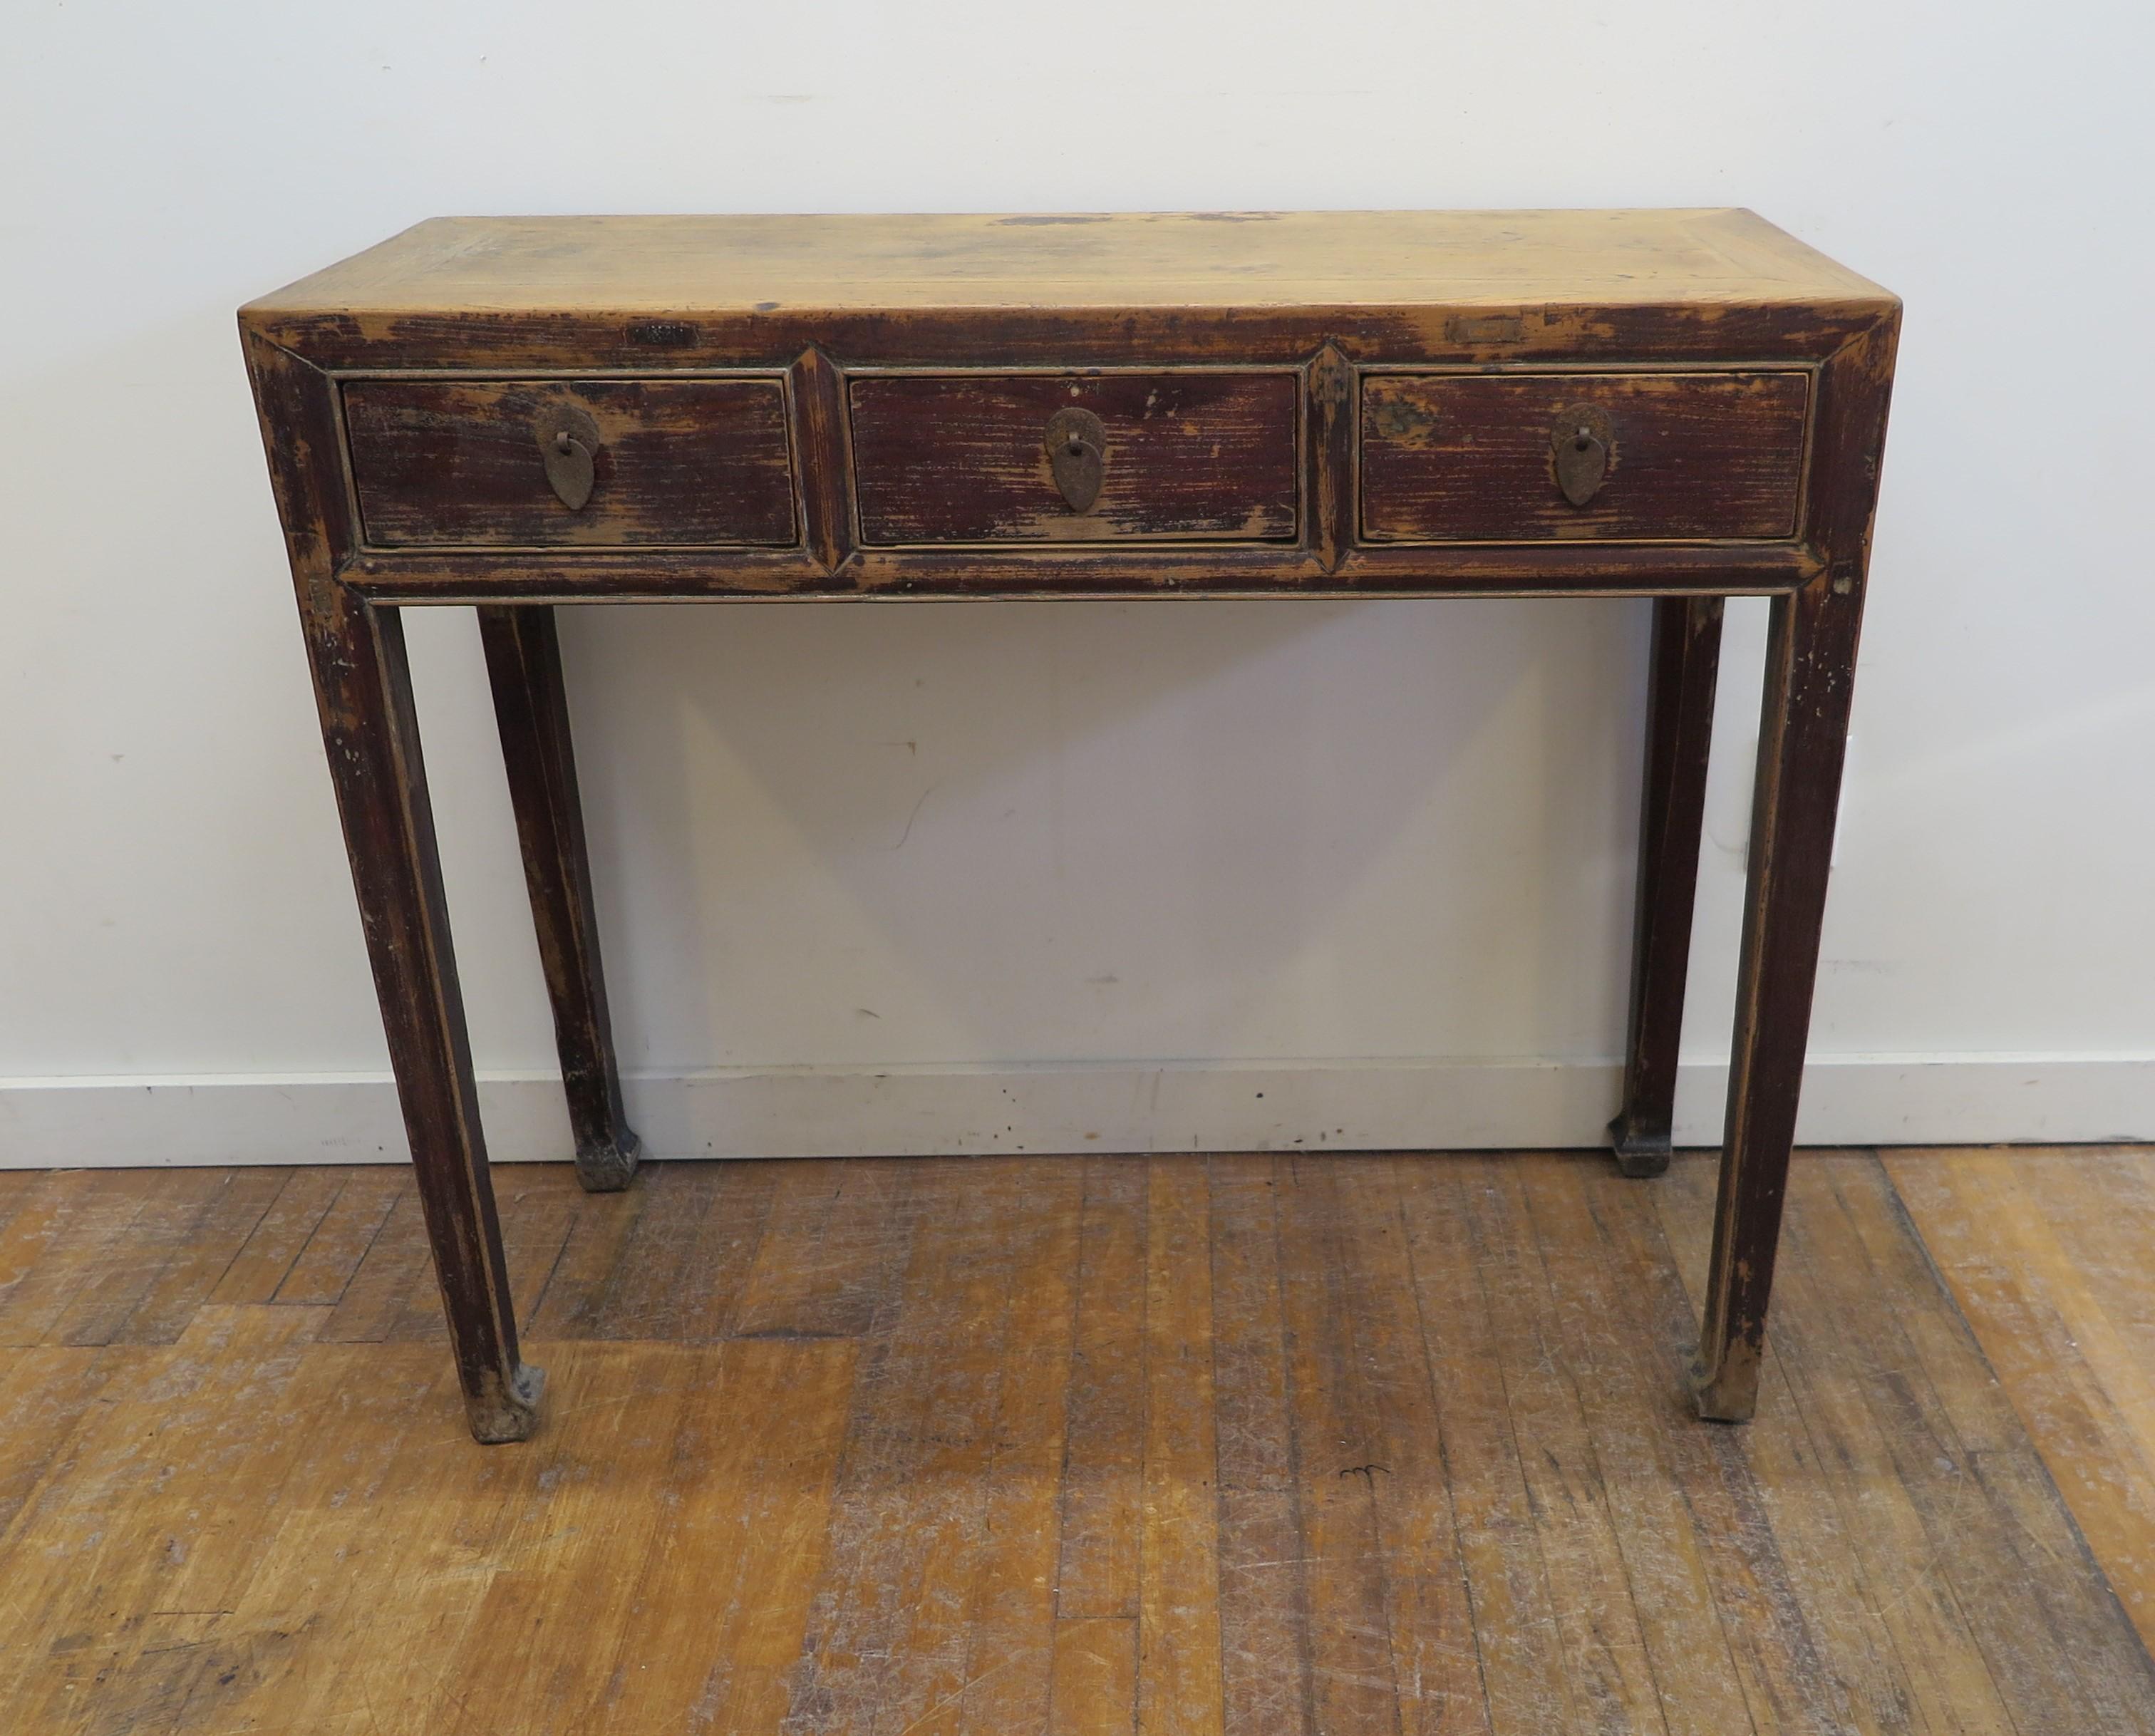 19th century rustic console table. Antique rustic three drawer console table. Chinese Elm wood with three drawers set on tapered legs terminating to hoofed feet. Wonderful time endured patina.  The top is smooth as silk to the touch a unique quality